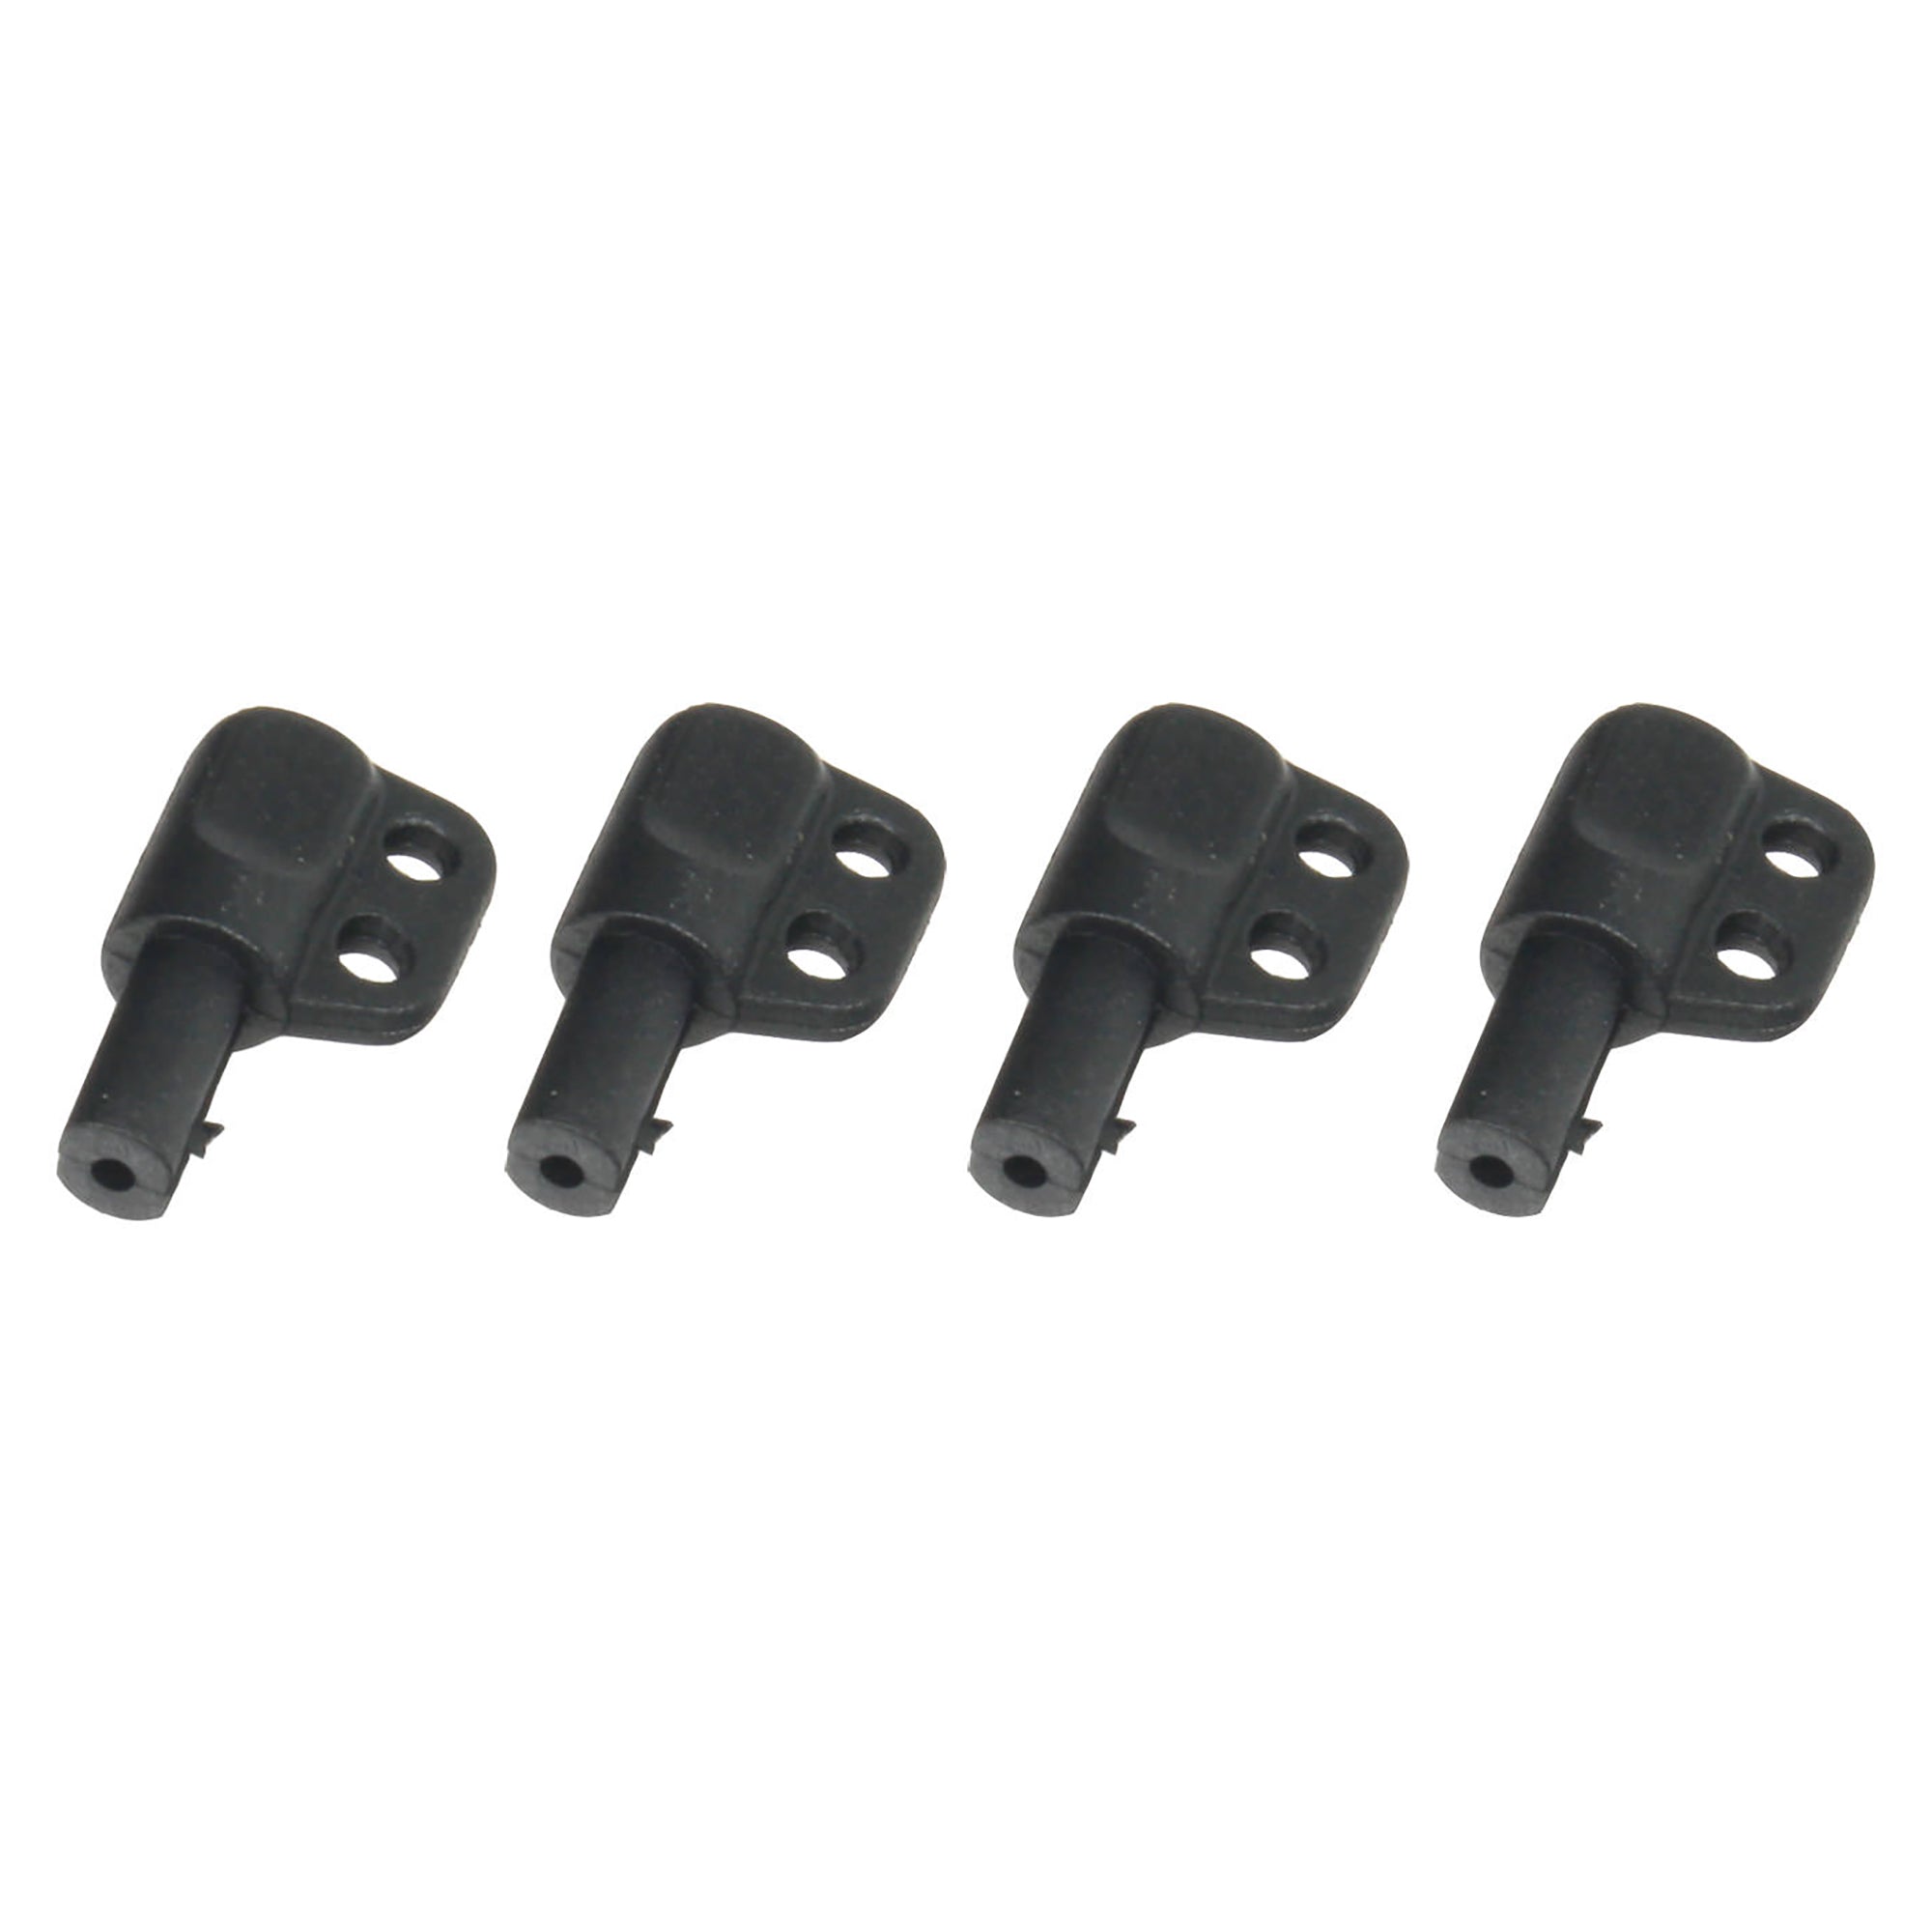 Joysway 881137 DF95 Jib Boom Front End Fitting (Pack of 4)